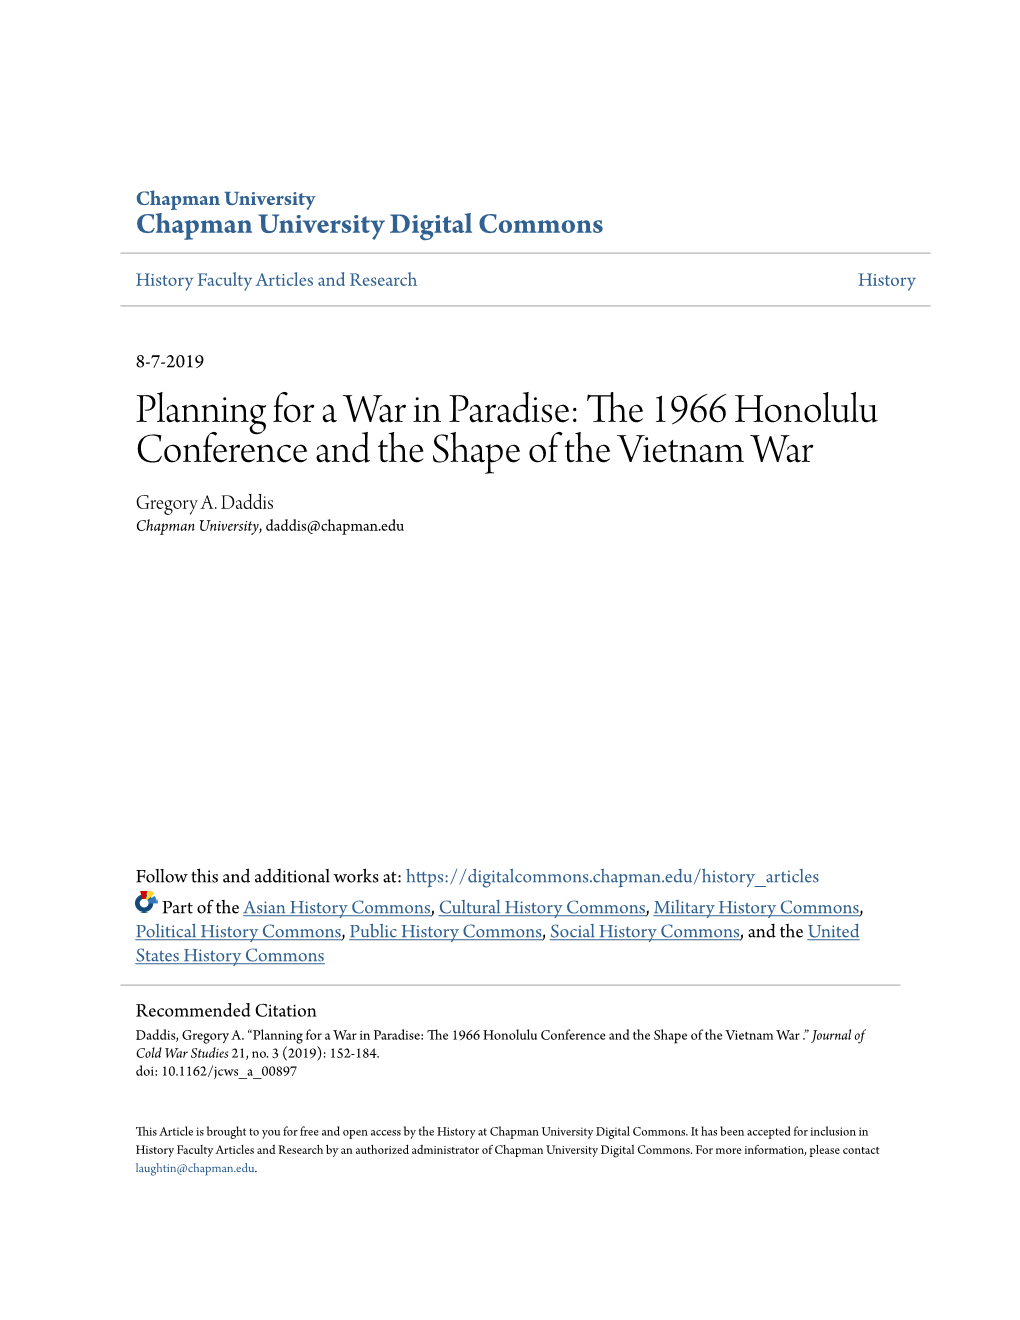 The 1966 Honolulu Conference and the Shape of the Vietnam War